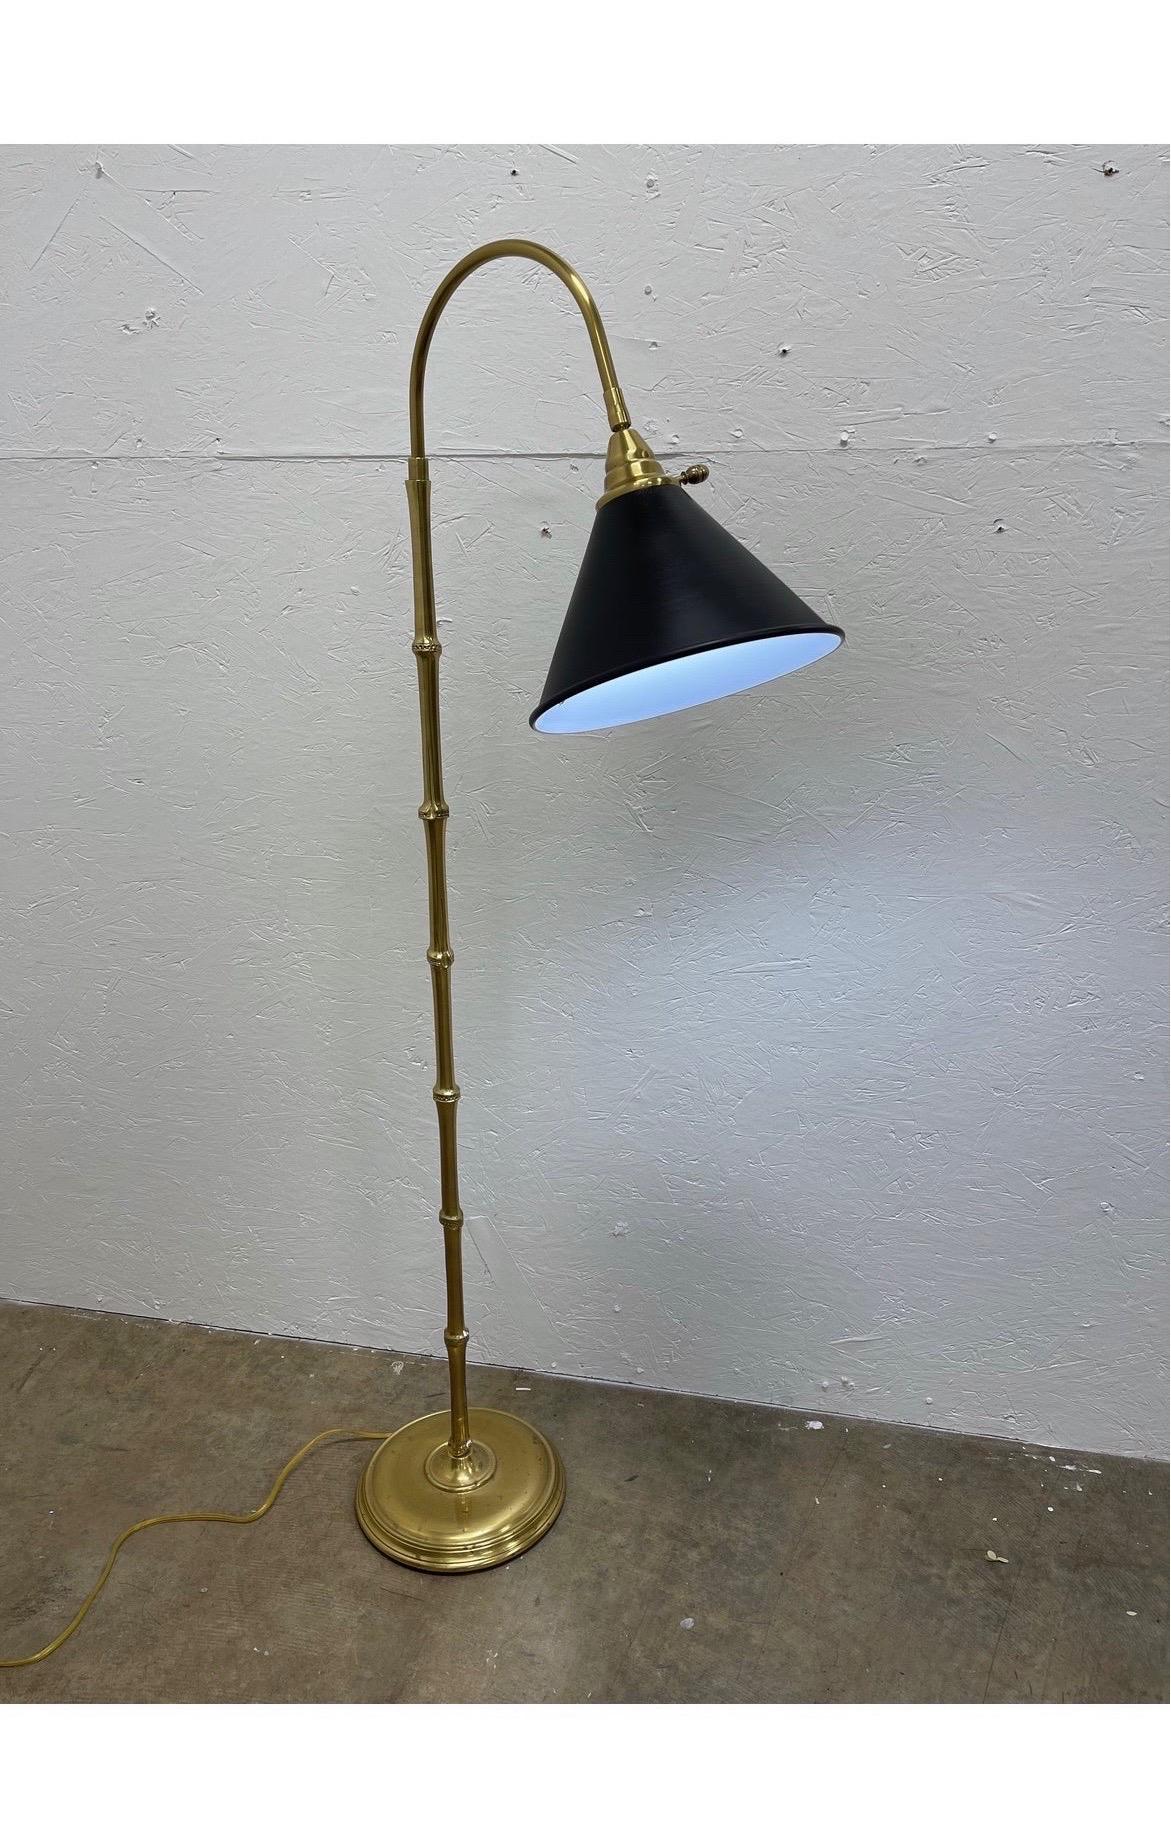 A vintage Mario Buatta for Frederick Cooper faux bamboo brass floor lamp with black tole and enamel shade. Marked to interior of shade. Professionally rewired.
Base measure 10.5”
Shade 10”.